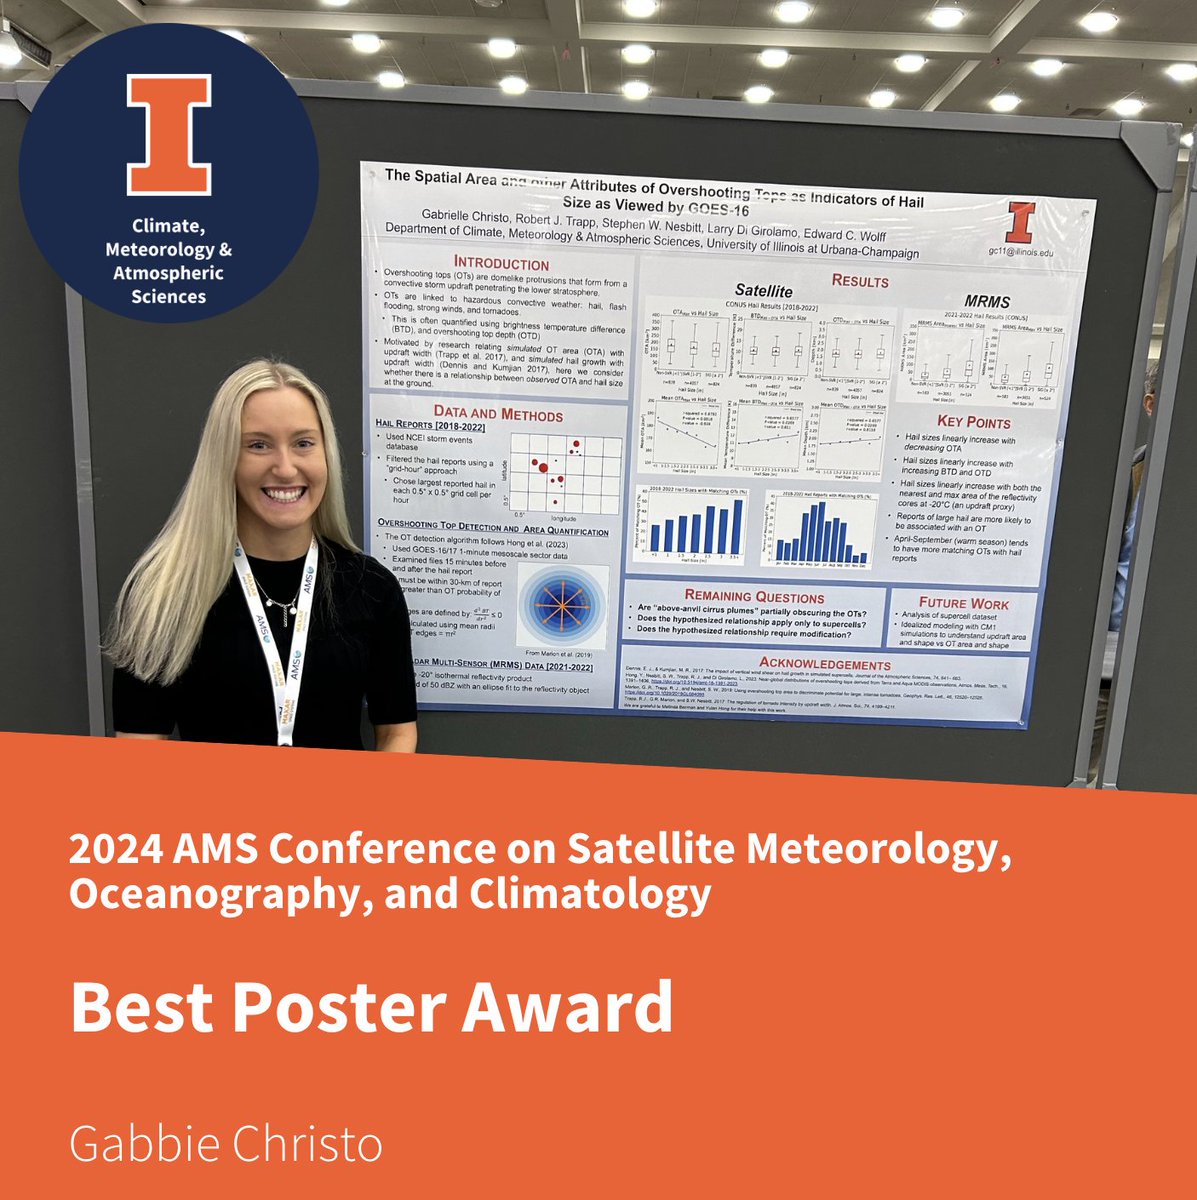 Congratulations to Gabbie Christo (MS 2024) for winning the Best Poster Award at the AMS Conference on Satellite Meteorology, Oceanography, and Climatology in Baltimore, MD this year!